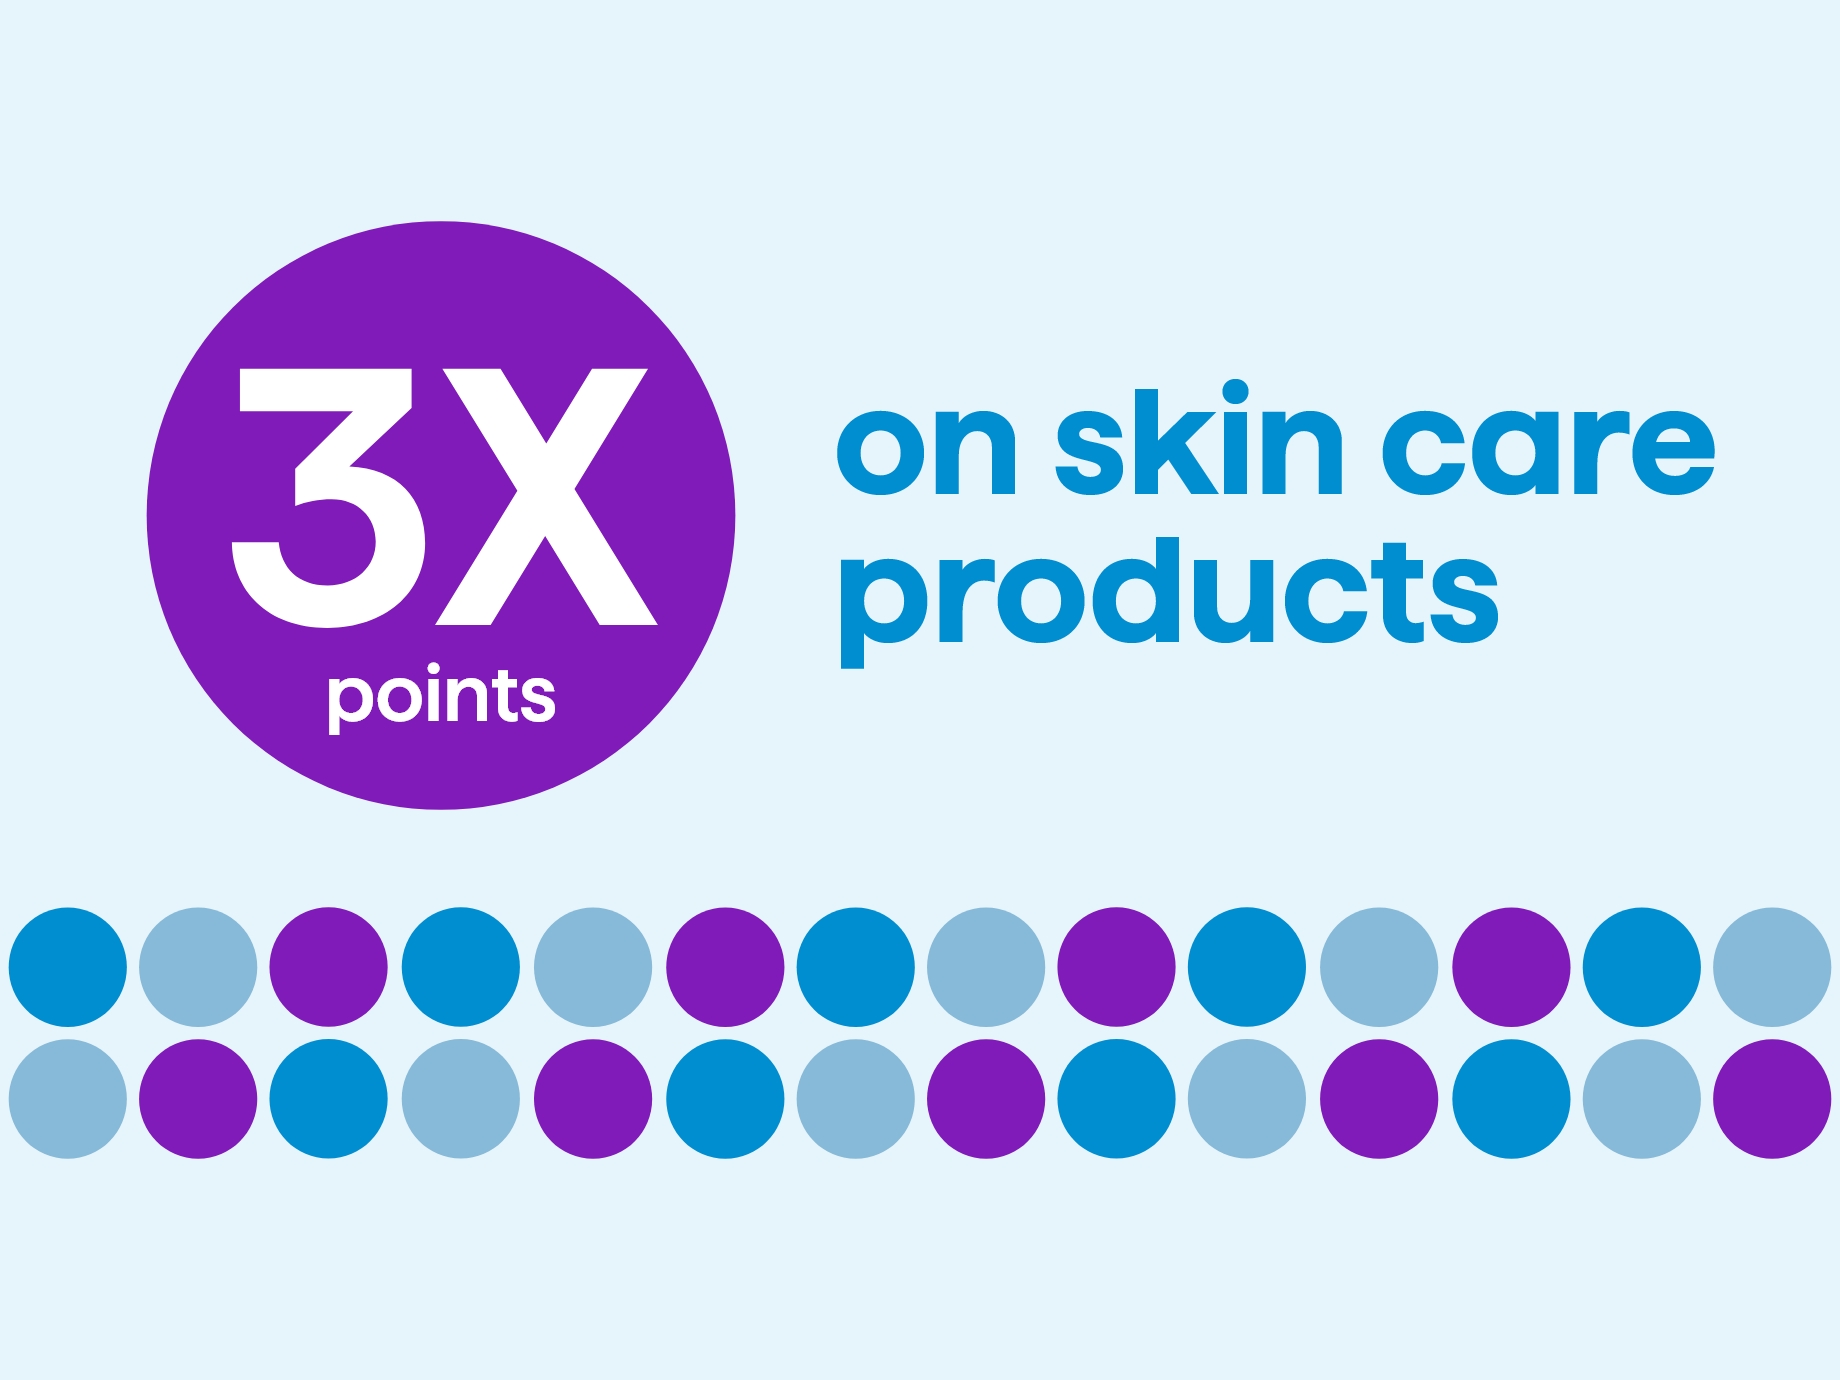 earn 3x the points on skin care products